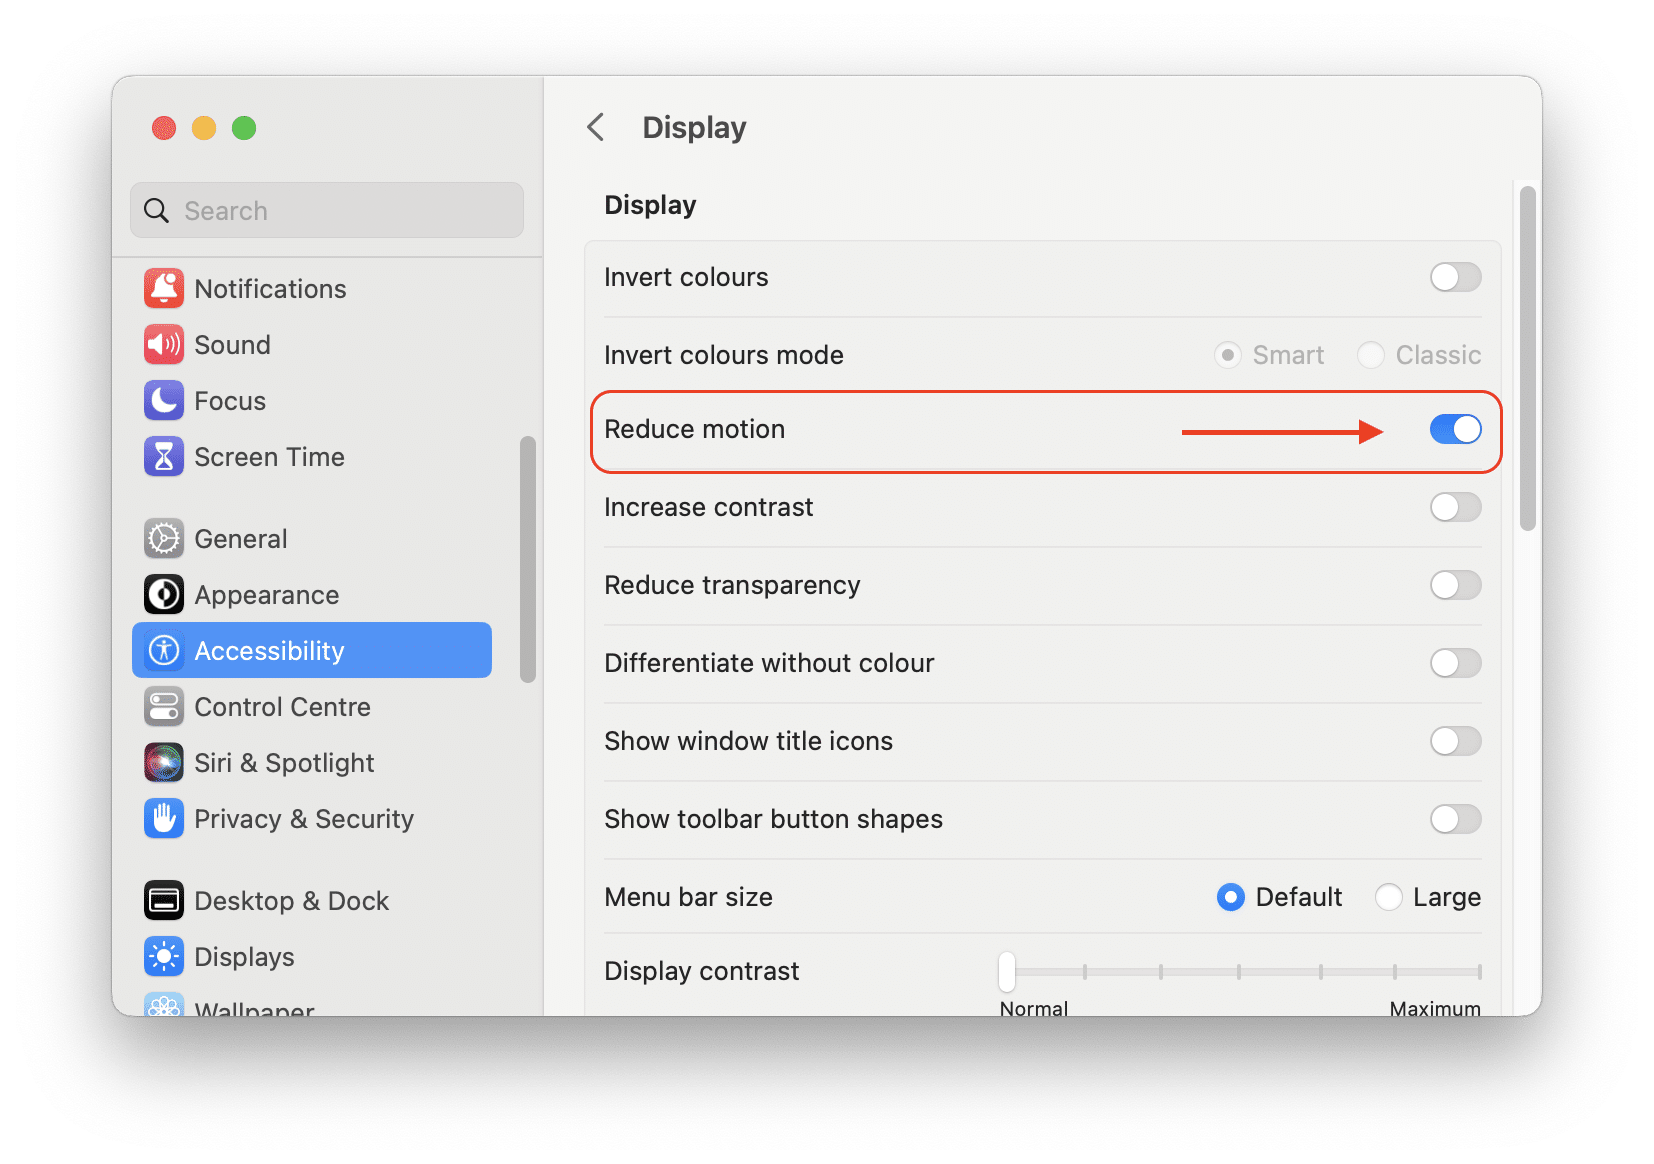 System preferences showing display options